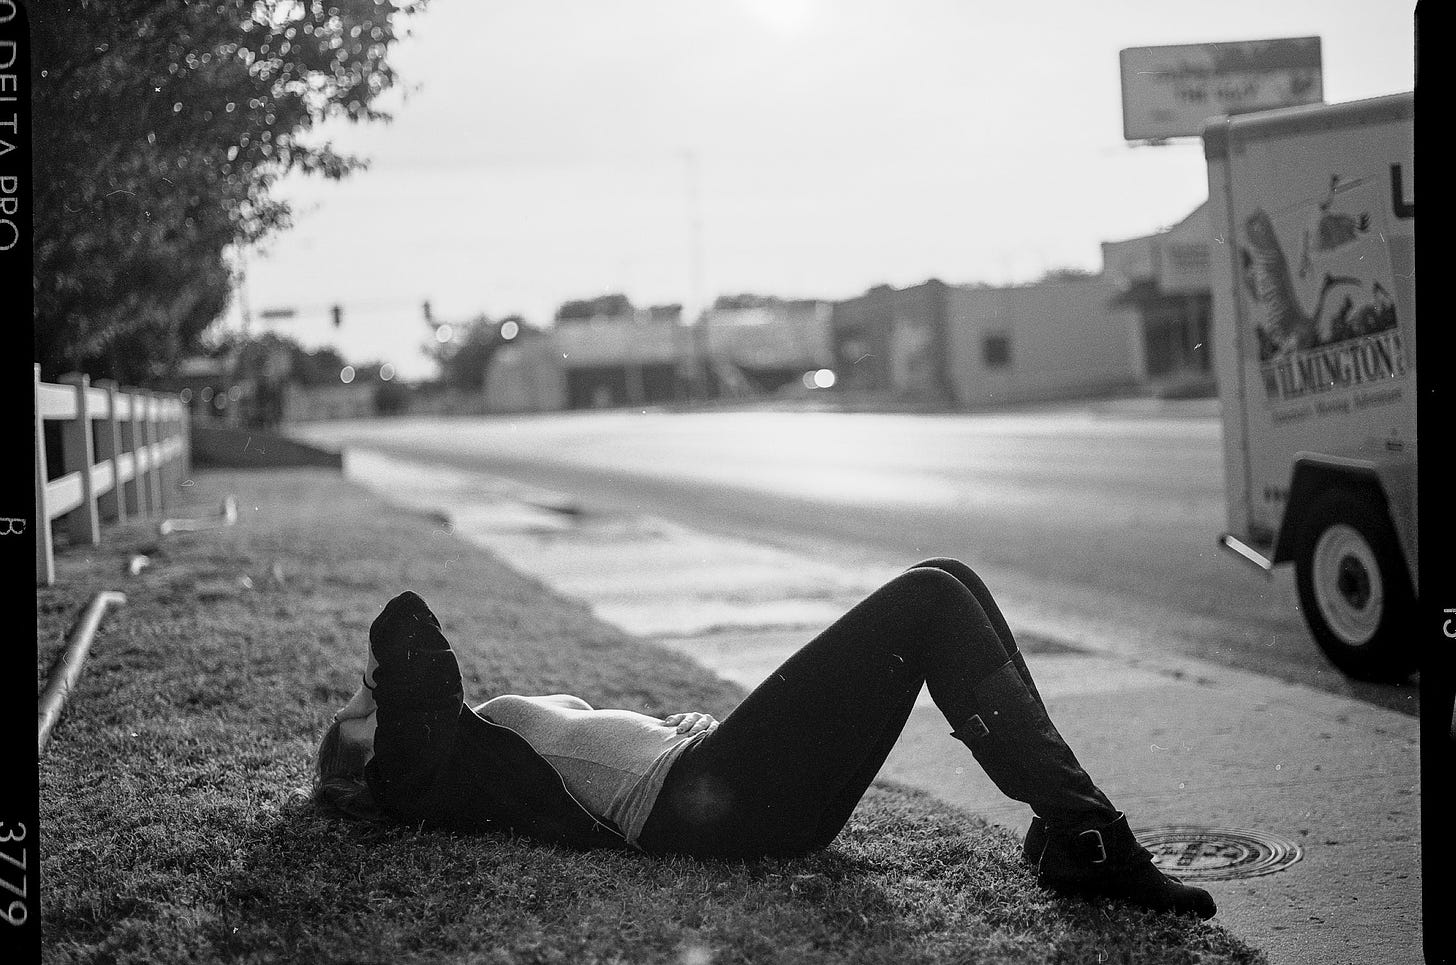 A black and white film photo. Amber is lying on a narrow, grassy patch next to a road. Her knees are bent. One hand rests on her stomach. Her other hand is on her forehead, obstructing the view of her face.